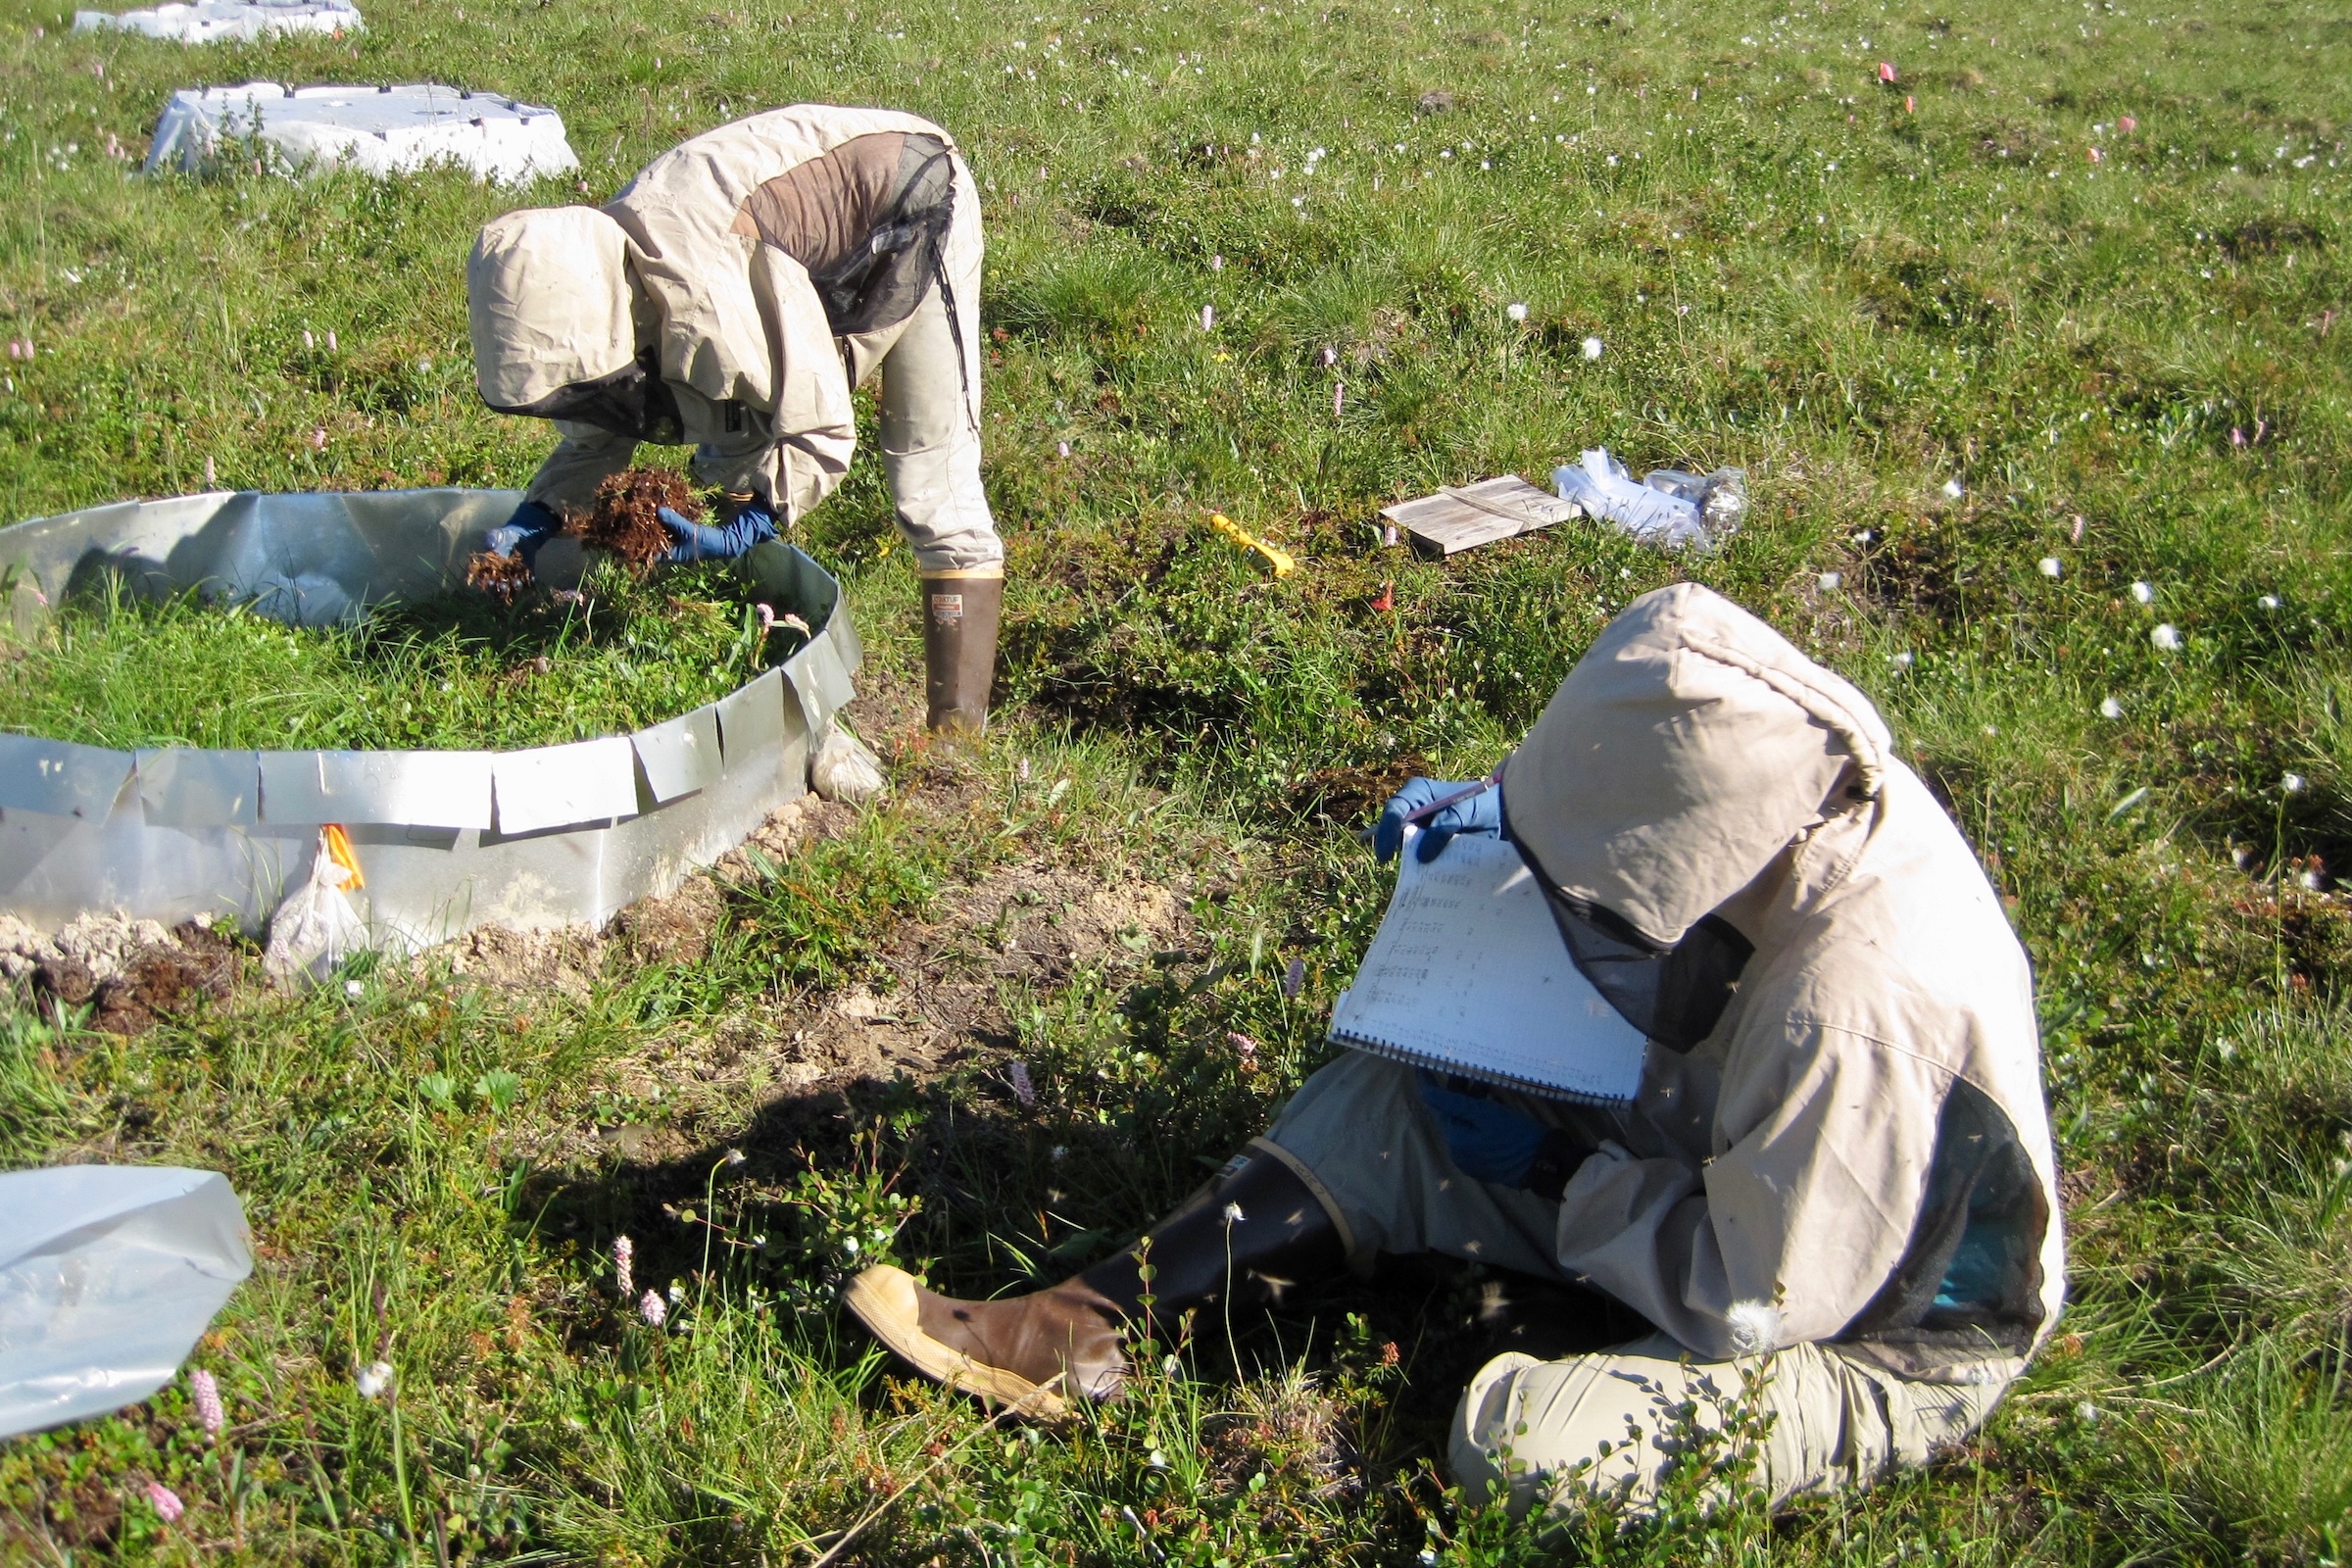 One scientist in protective clothing against insects leans over a metal circle in a grassy area, while another dressed similarly taking notes seated in the grass nearby